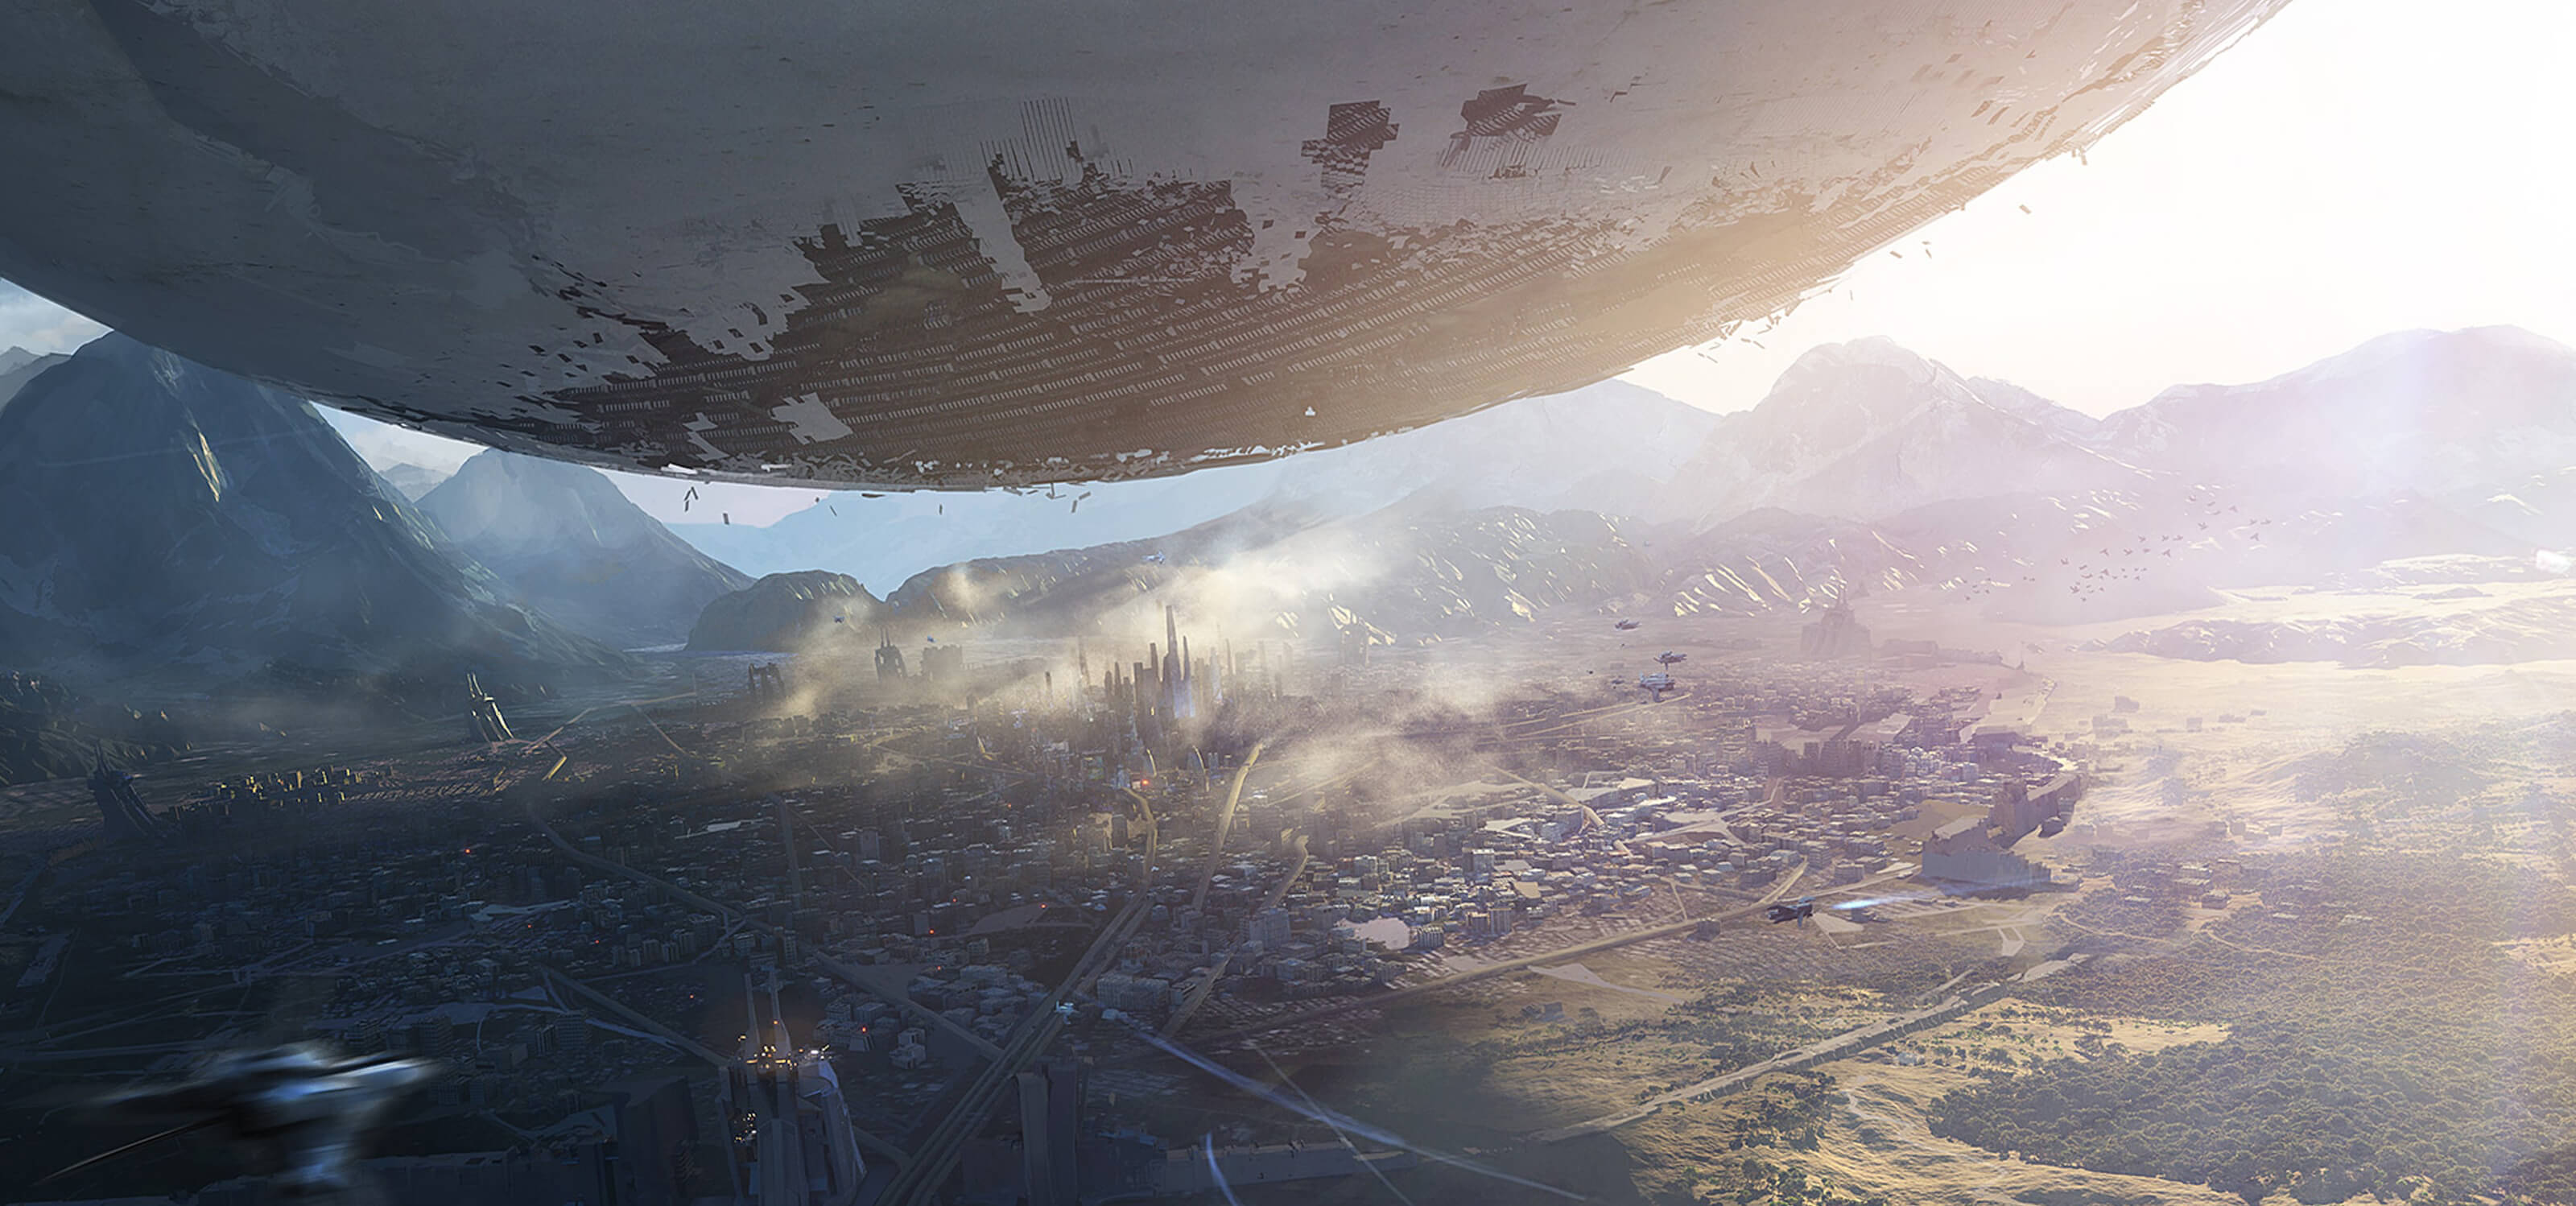 Screenshot from Destiny of an alien spaceship, called the Traveler, hovering over the last city